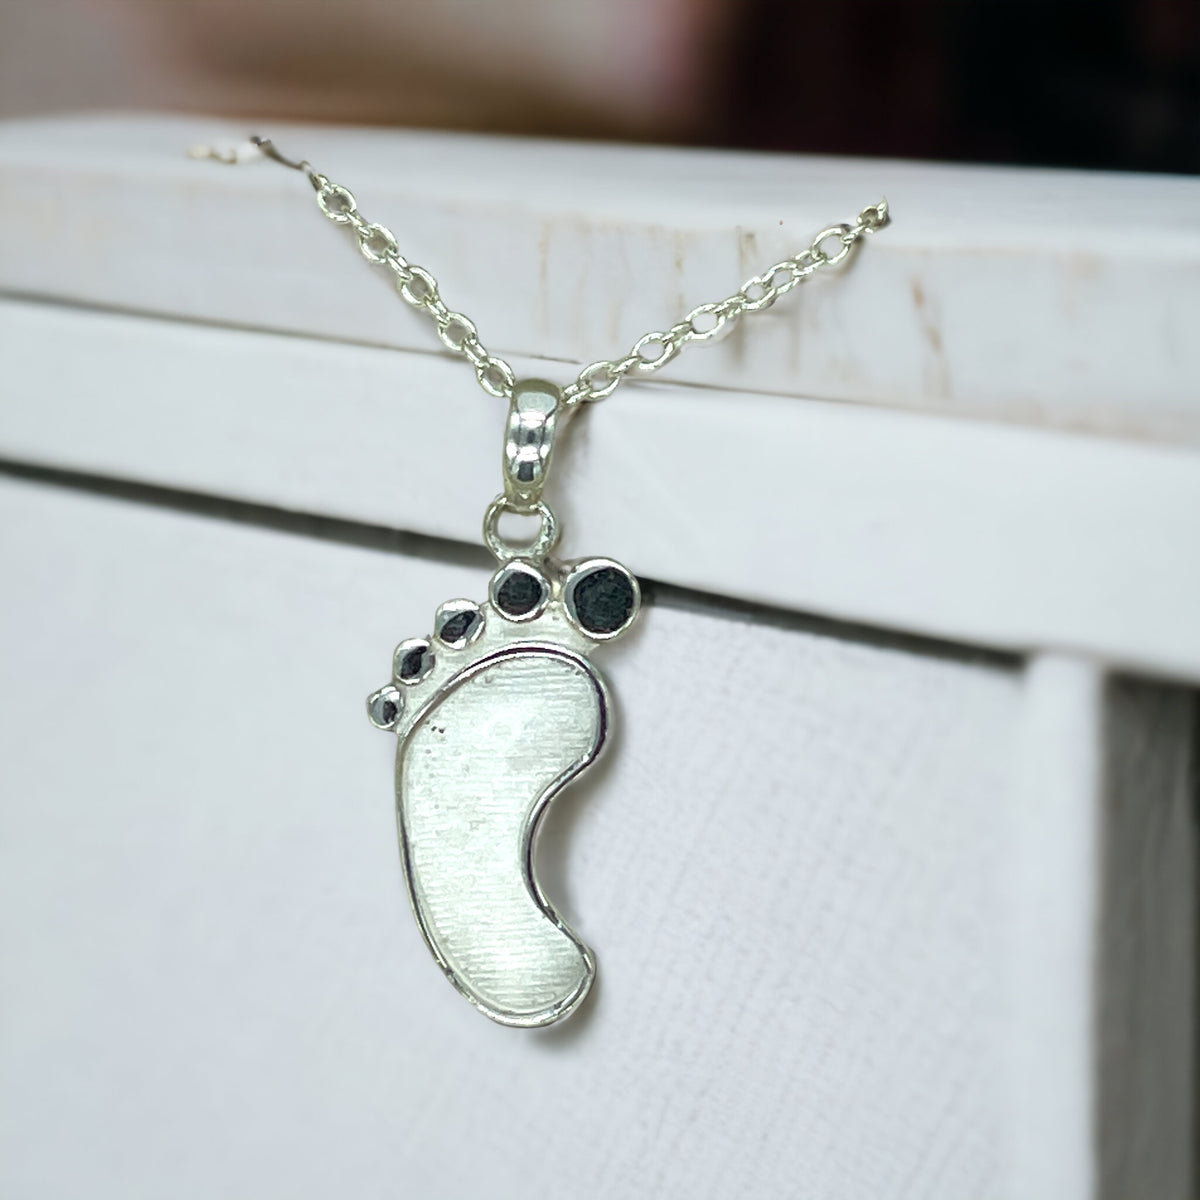 Footprint 925 Sterling Silver Bezel Blank With Chain Keepsake For UV and Epoxy Resin with FREE Gift Box